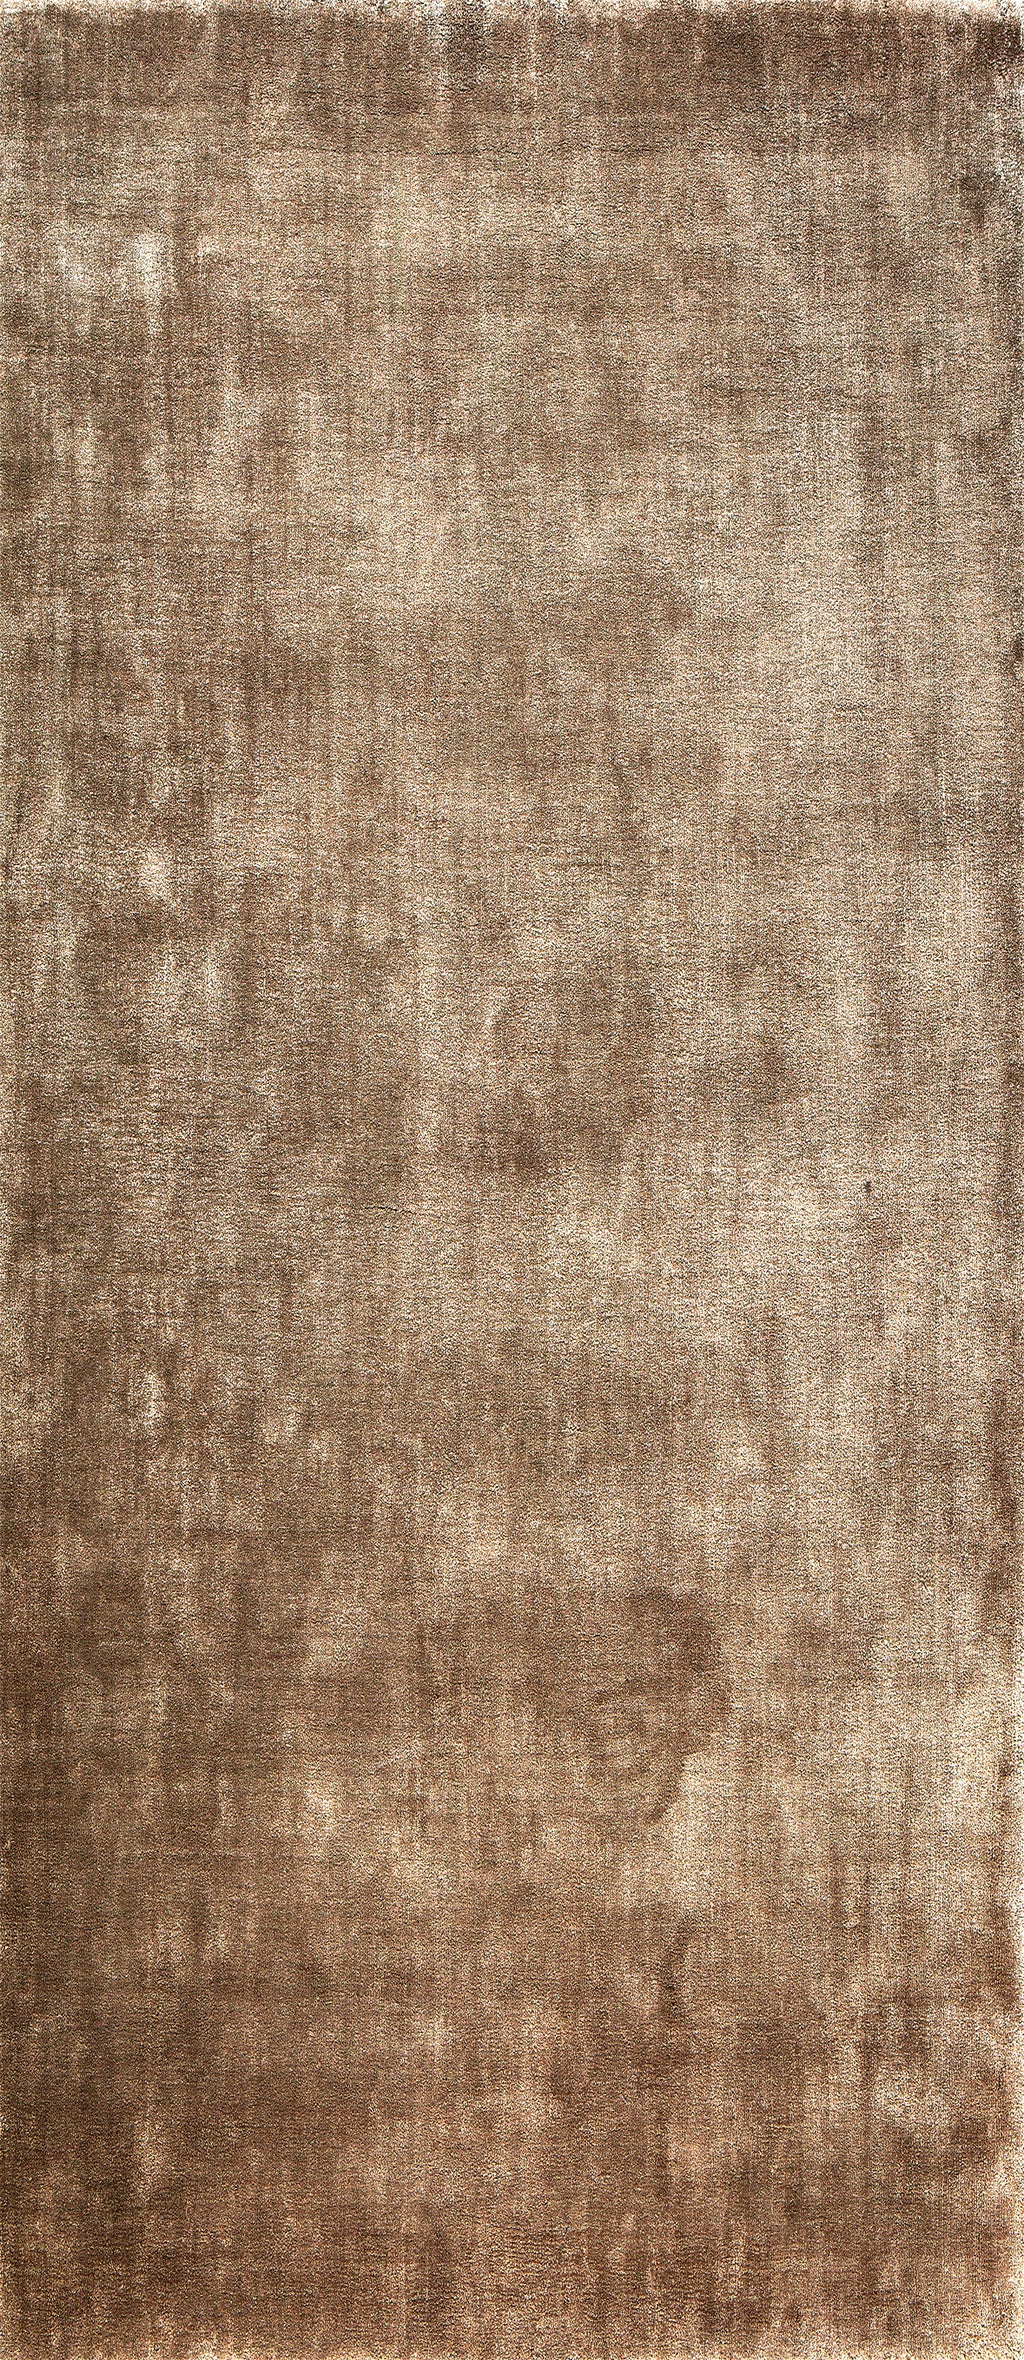 Surya Linen LIN-1000 Area Rug by Papilio